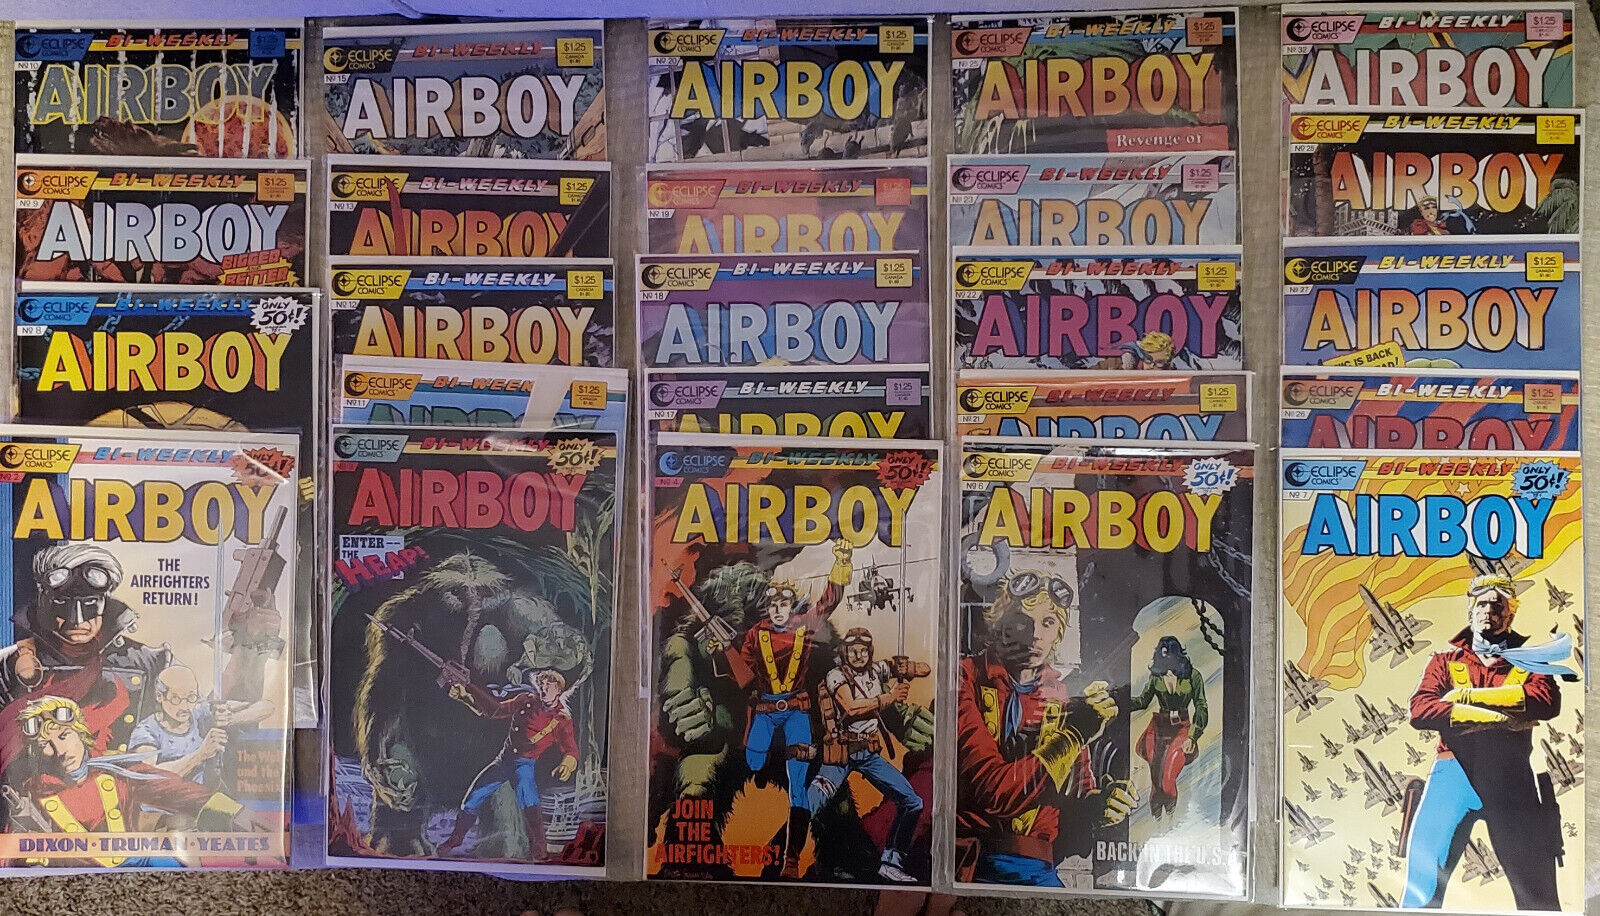 Airboy #2-32 (Eclipse 1986) High Grade- Single Issues $1.75-2.69 You Pick